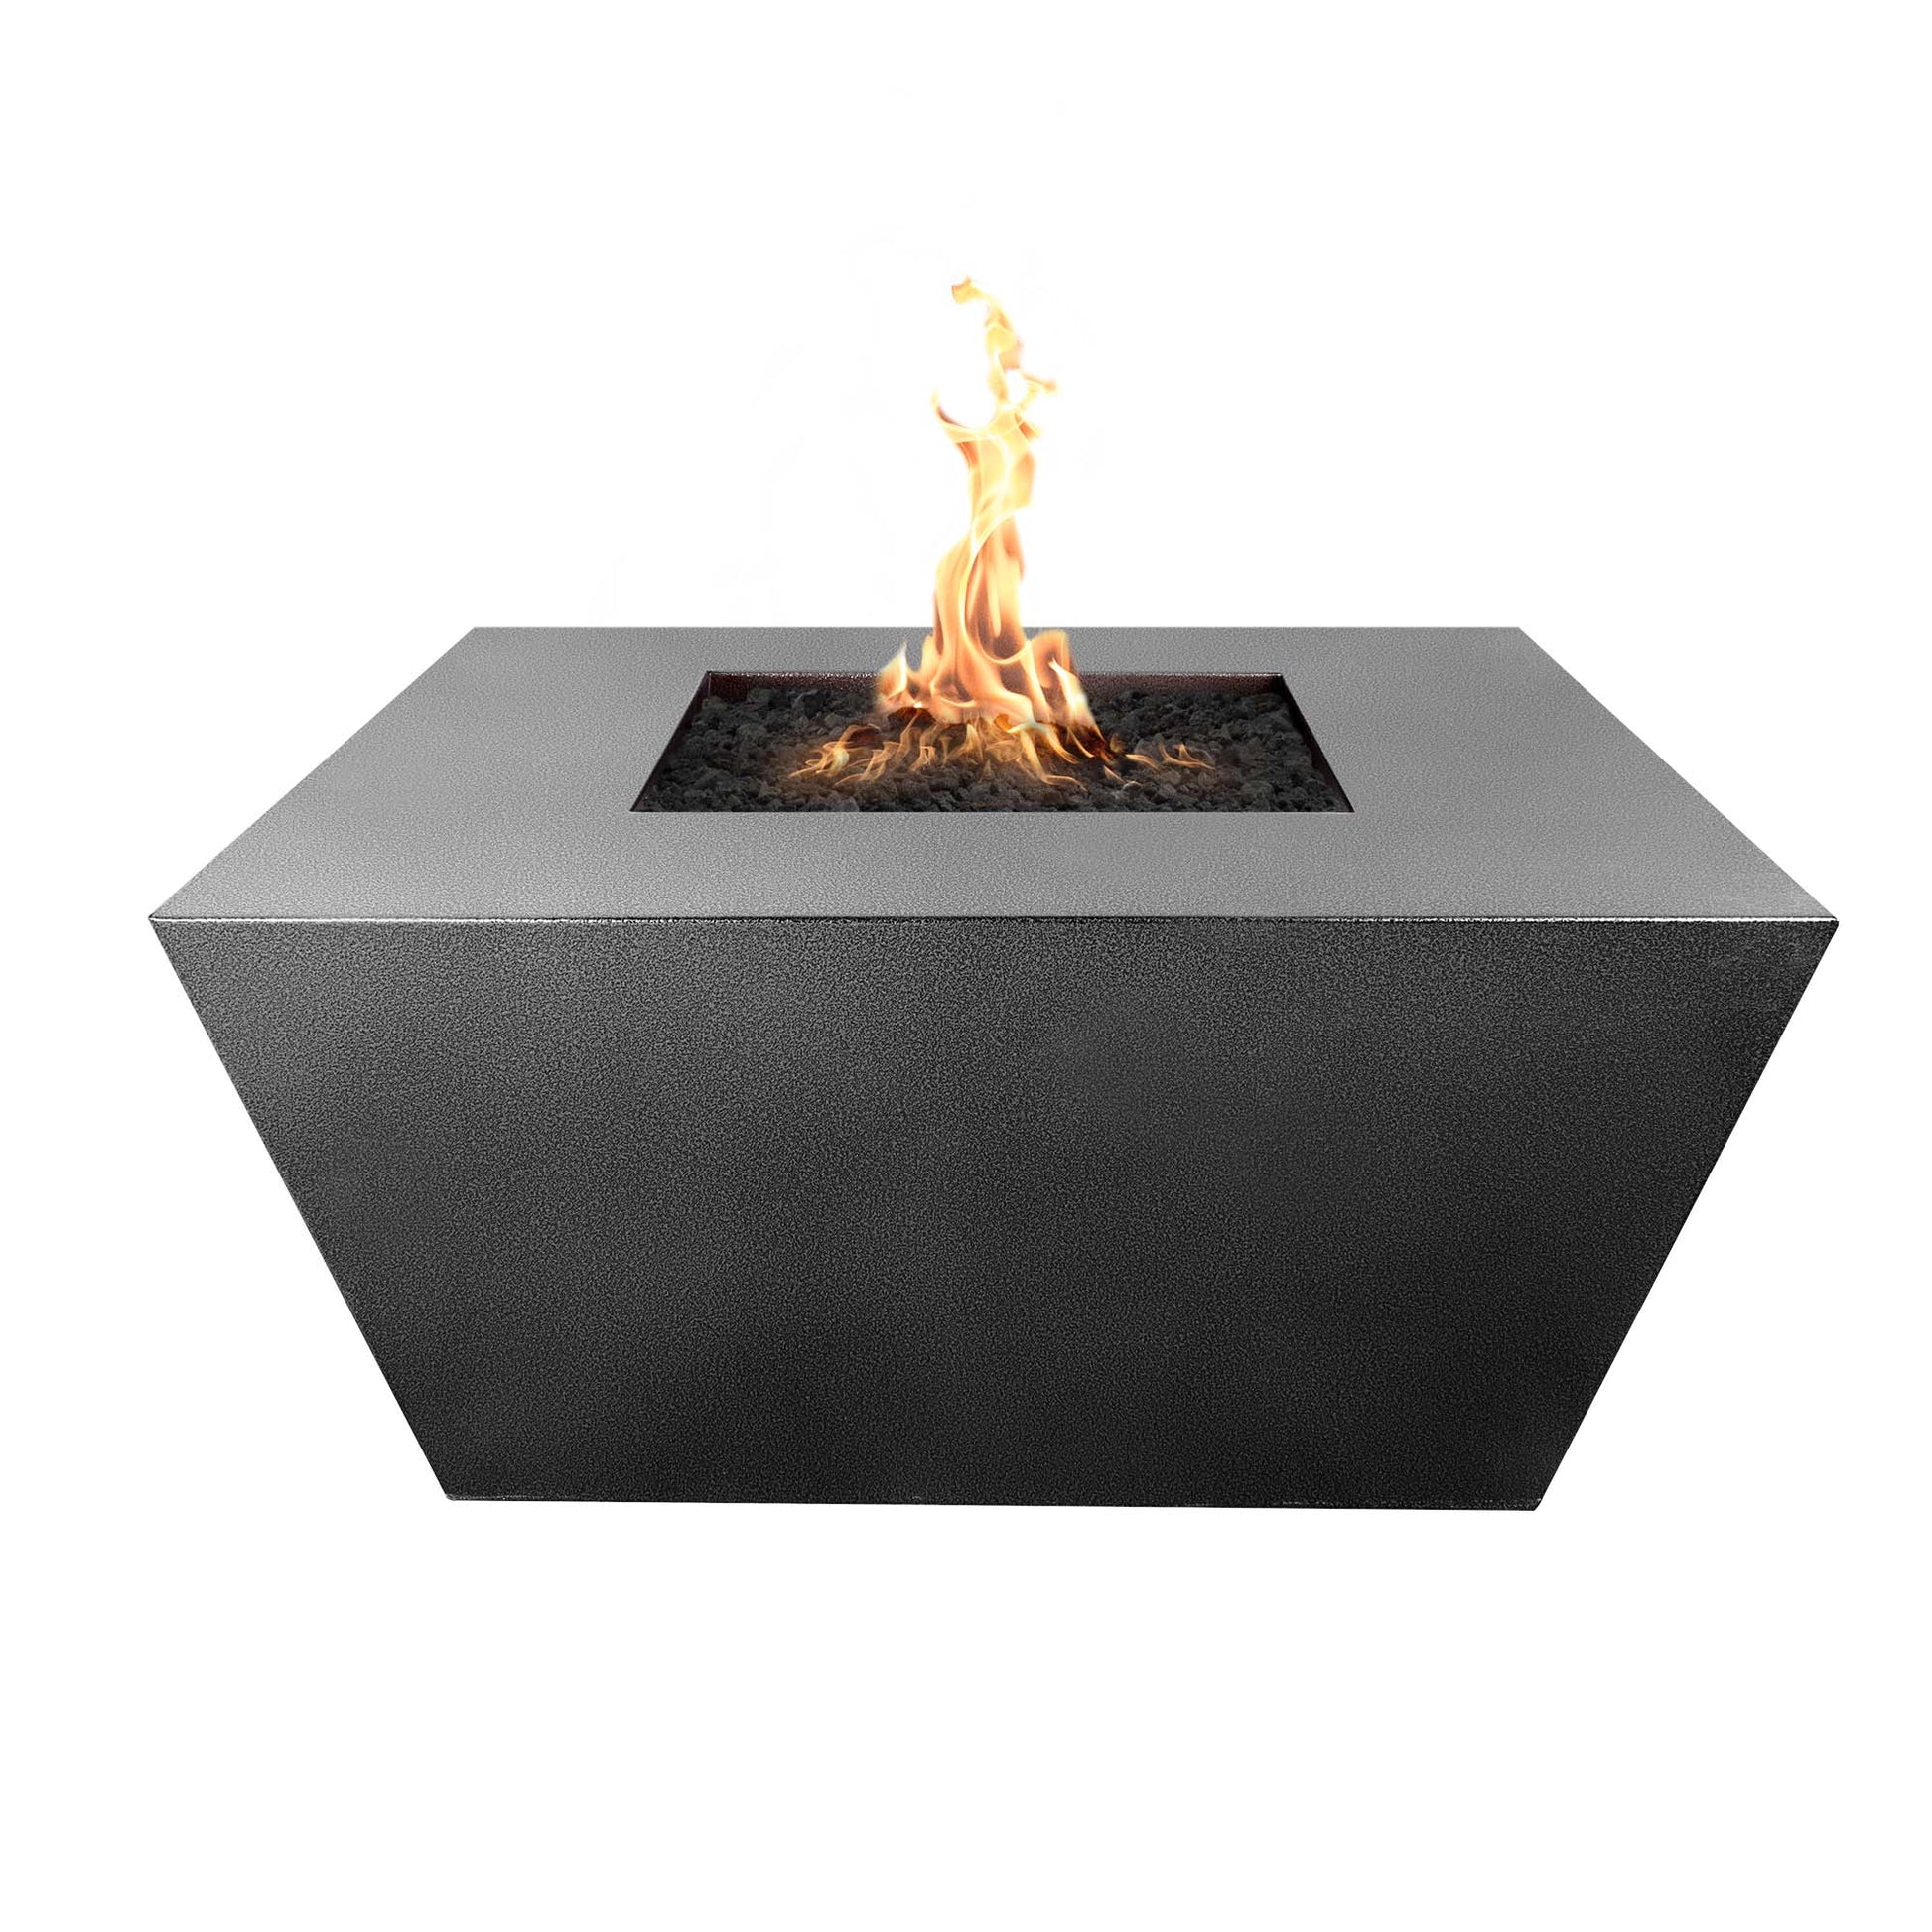 The Outdoor Plus Square Redan 36" Corten Steel Liquid Propane Fire Pit with Match Lit with Flame Sense Ignition